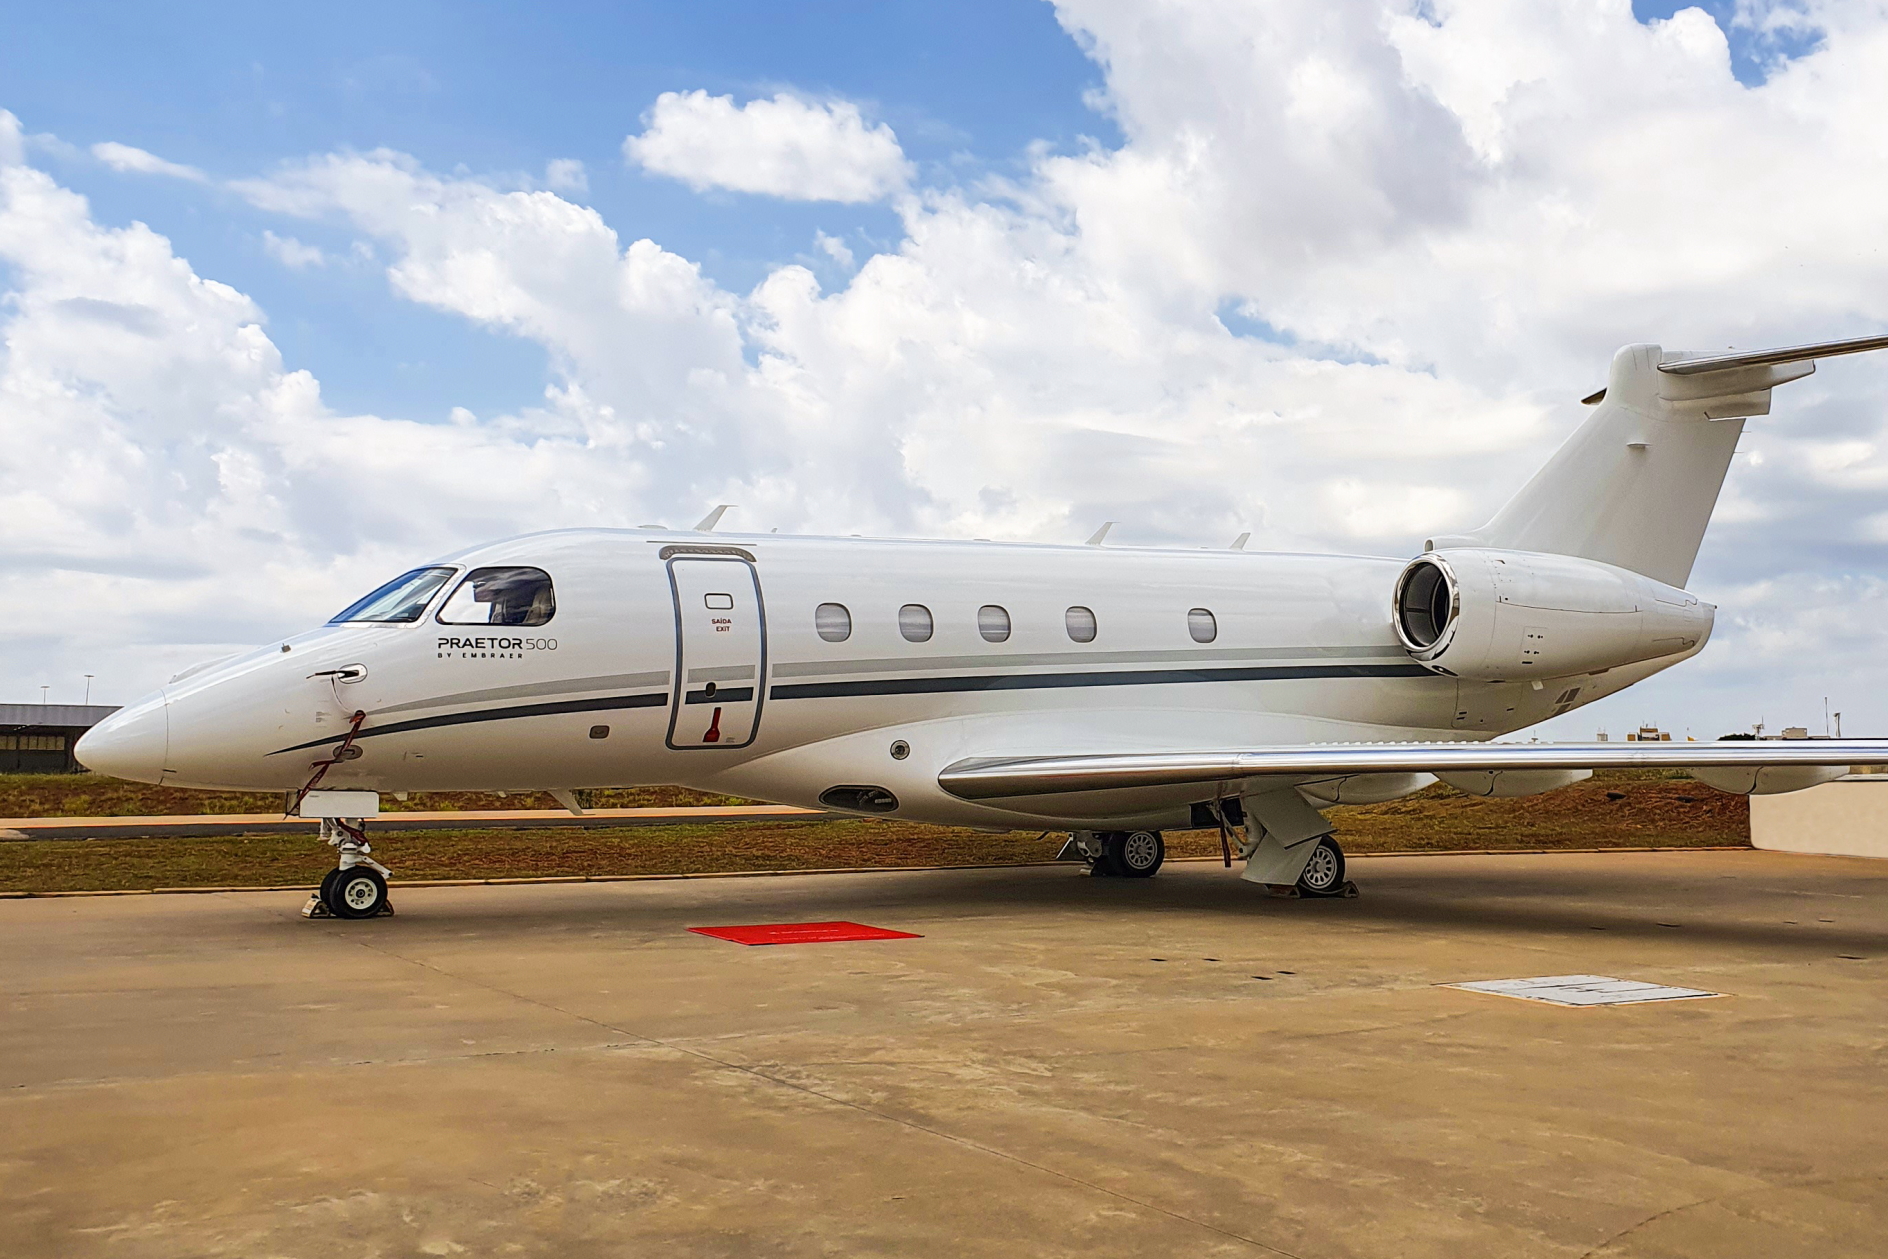 Embraer has completed the first conversion of a Legacy 450 to a Praetor 500 jet in Brazil. The conversion was performed at Embraer’s Service Center in Sorocaba, Brazil. Click to enlarge.